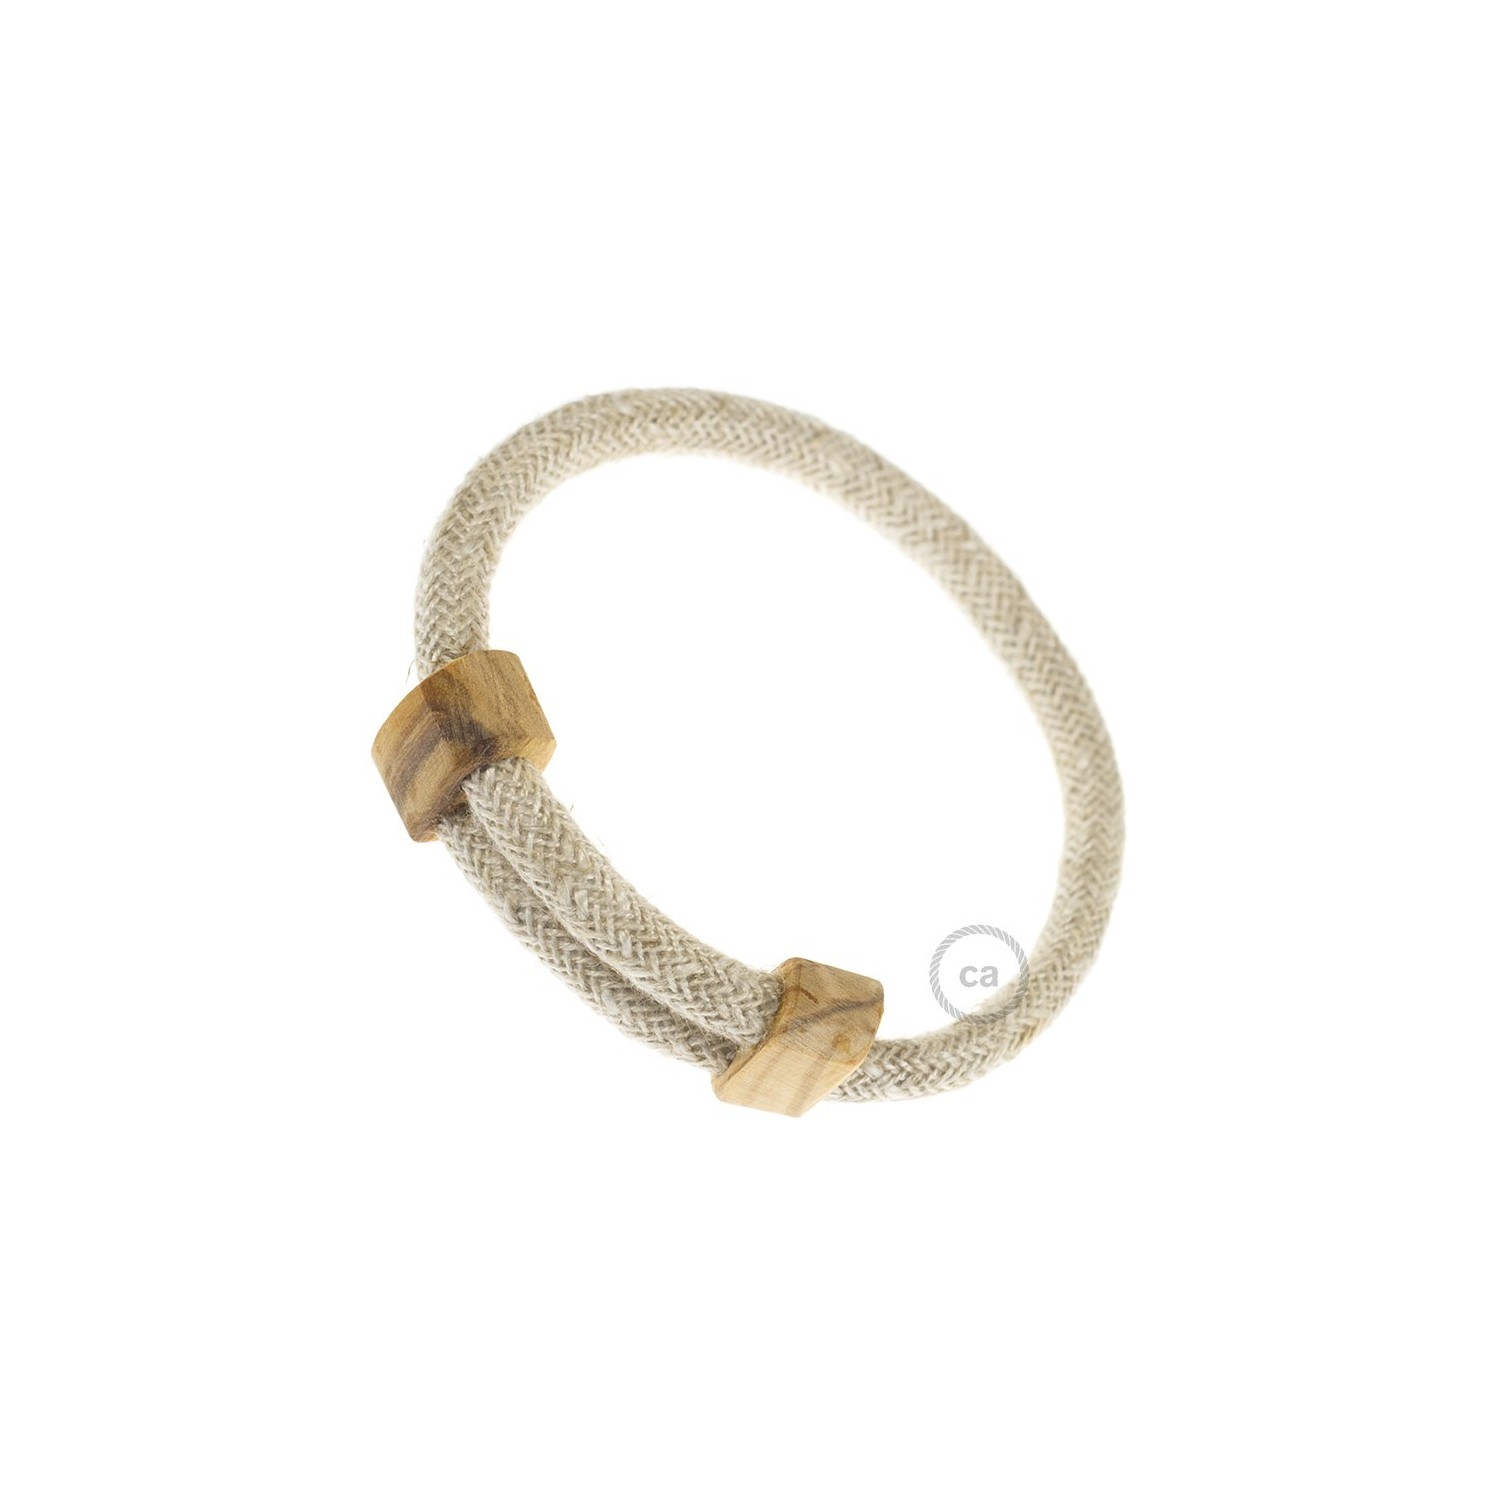 Creative-Bracelet in Natural Neutral Linen RN01. Wood sliding fastening. Made in Italy.